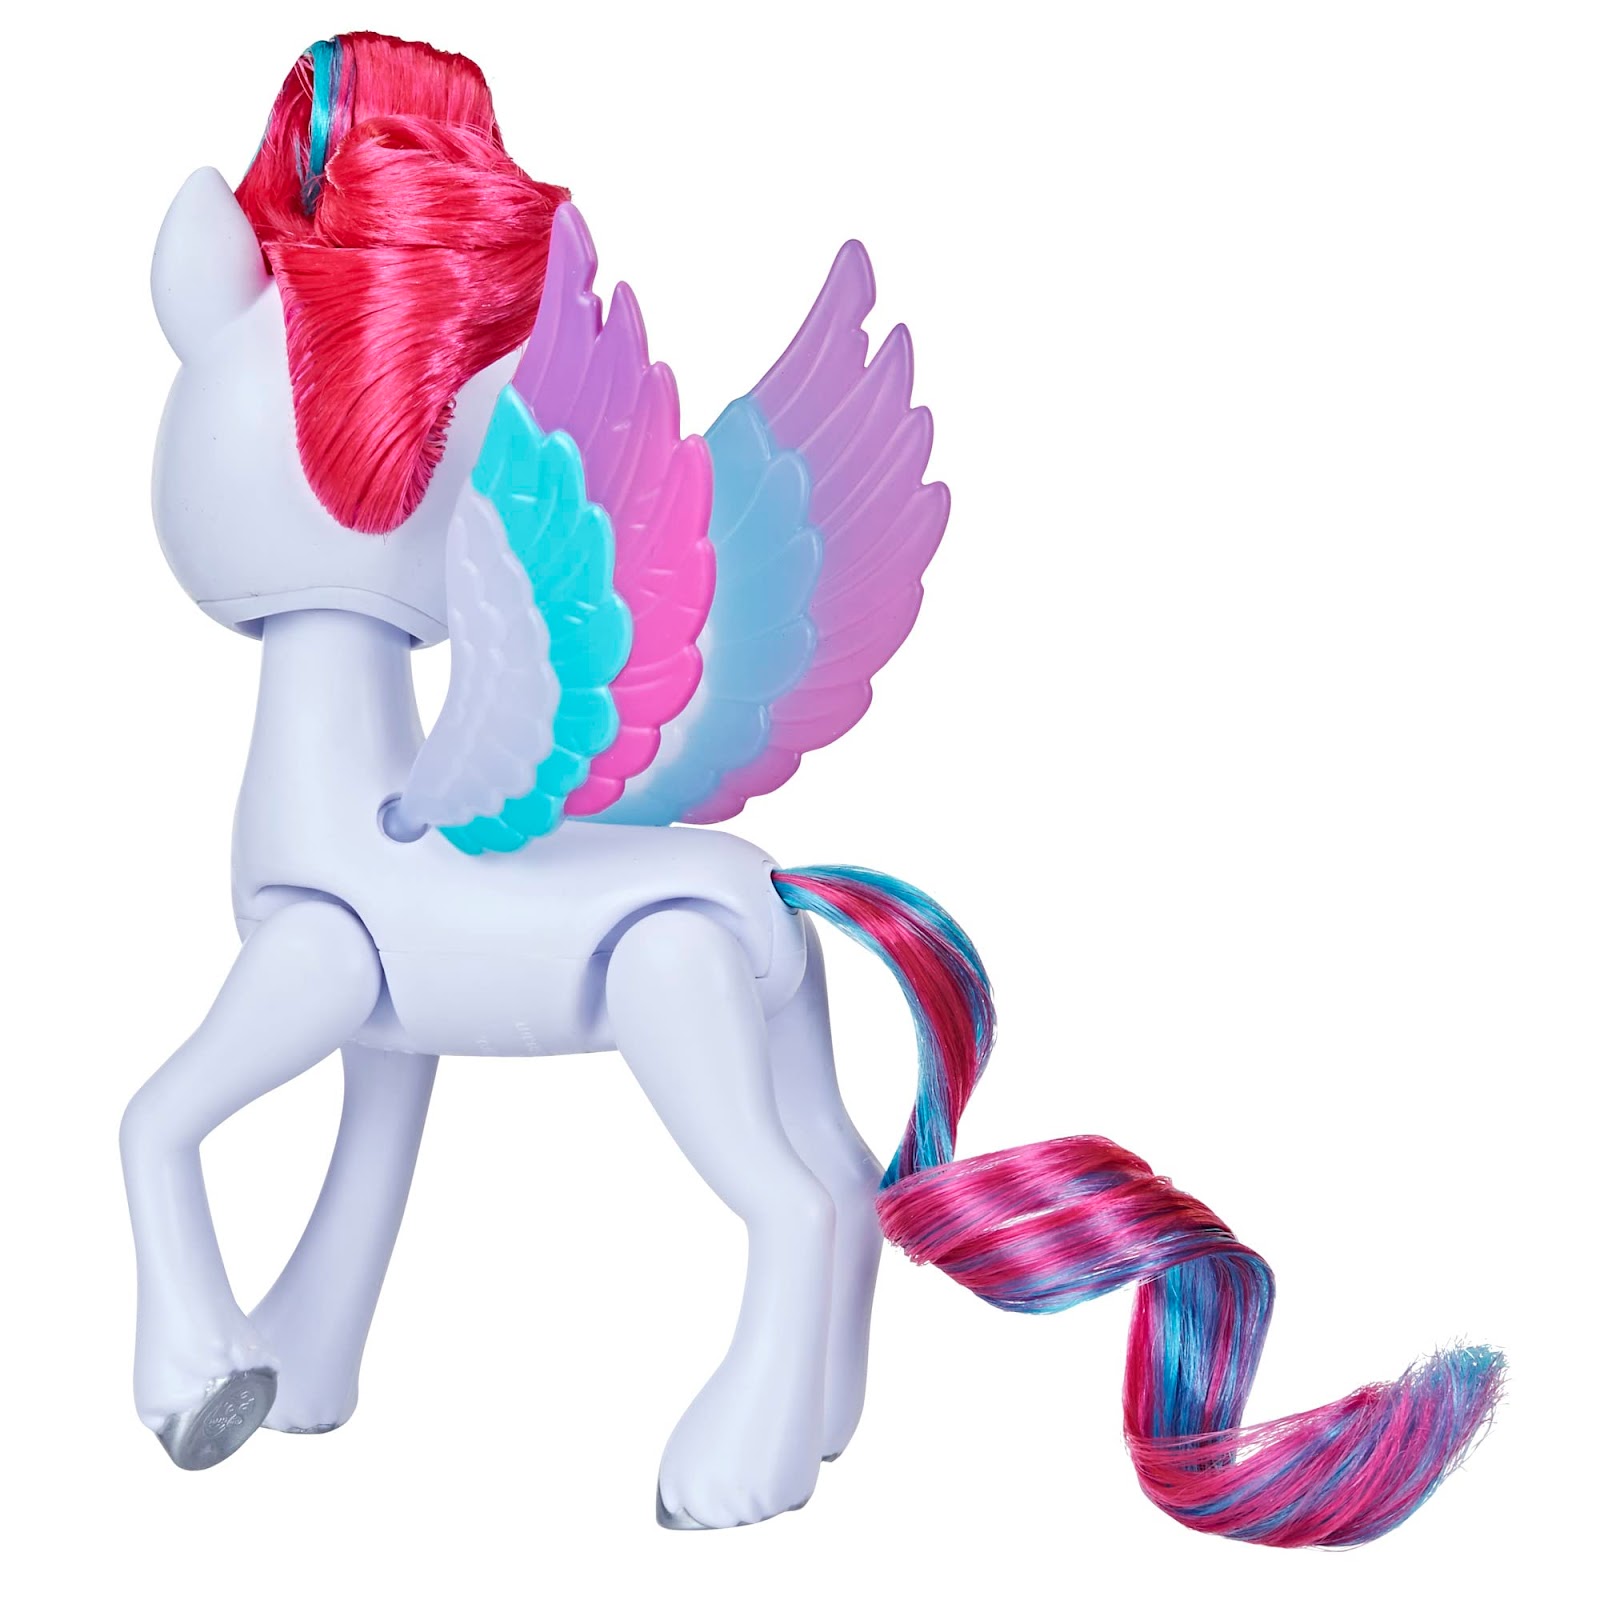  My Little Pony Toys Misty Brightdawn Style of The Day, 5-Inch  Hair Styling Dolls, Toys for 5 Year Old Girls and Boys : Toys & Games